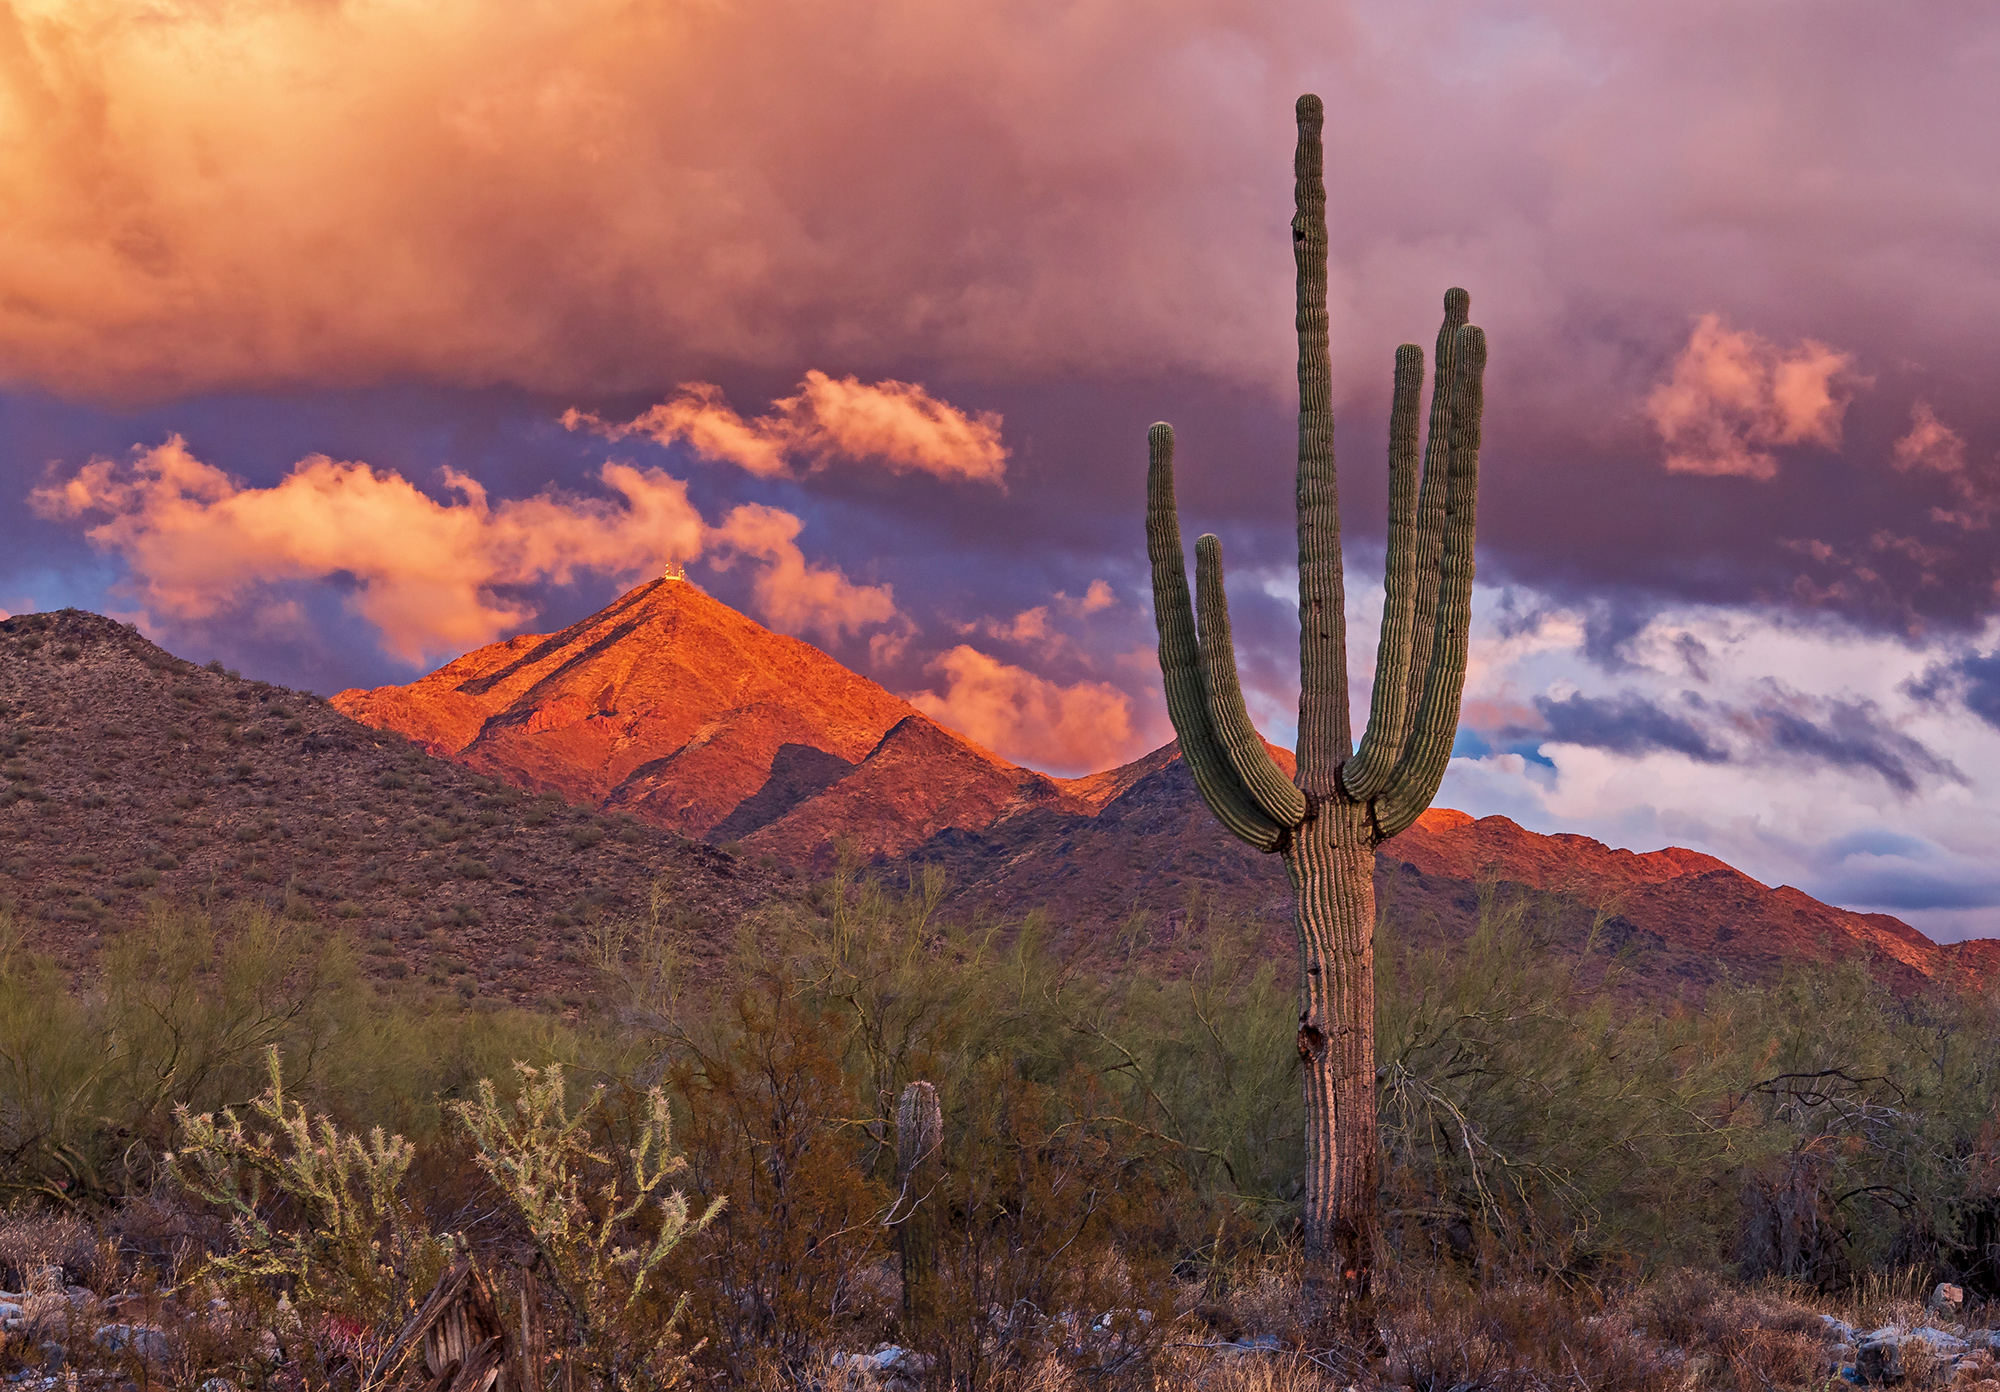 Scenic McDowell Sonoran Preserve with desert landscapes